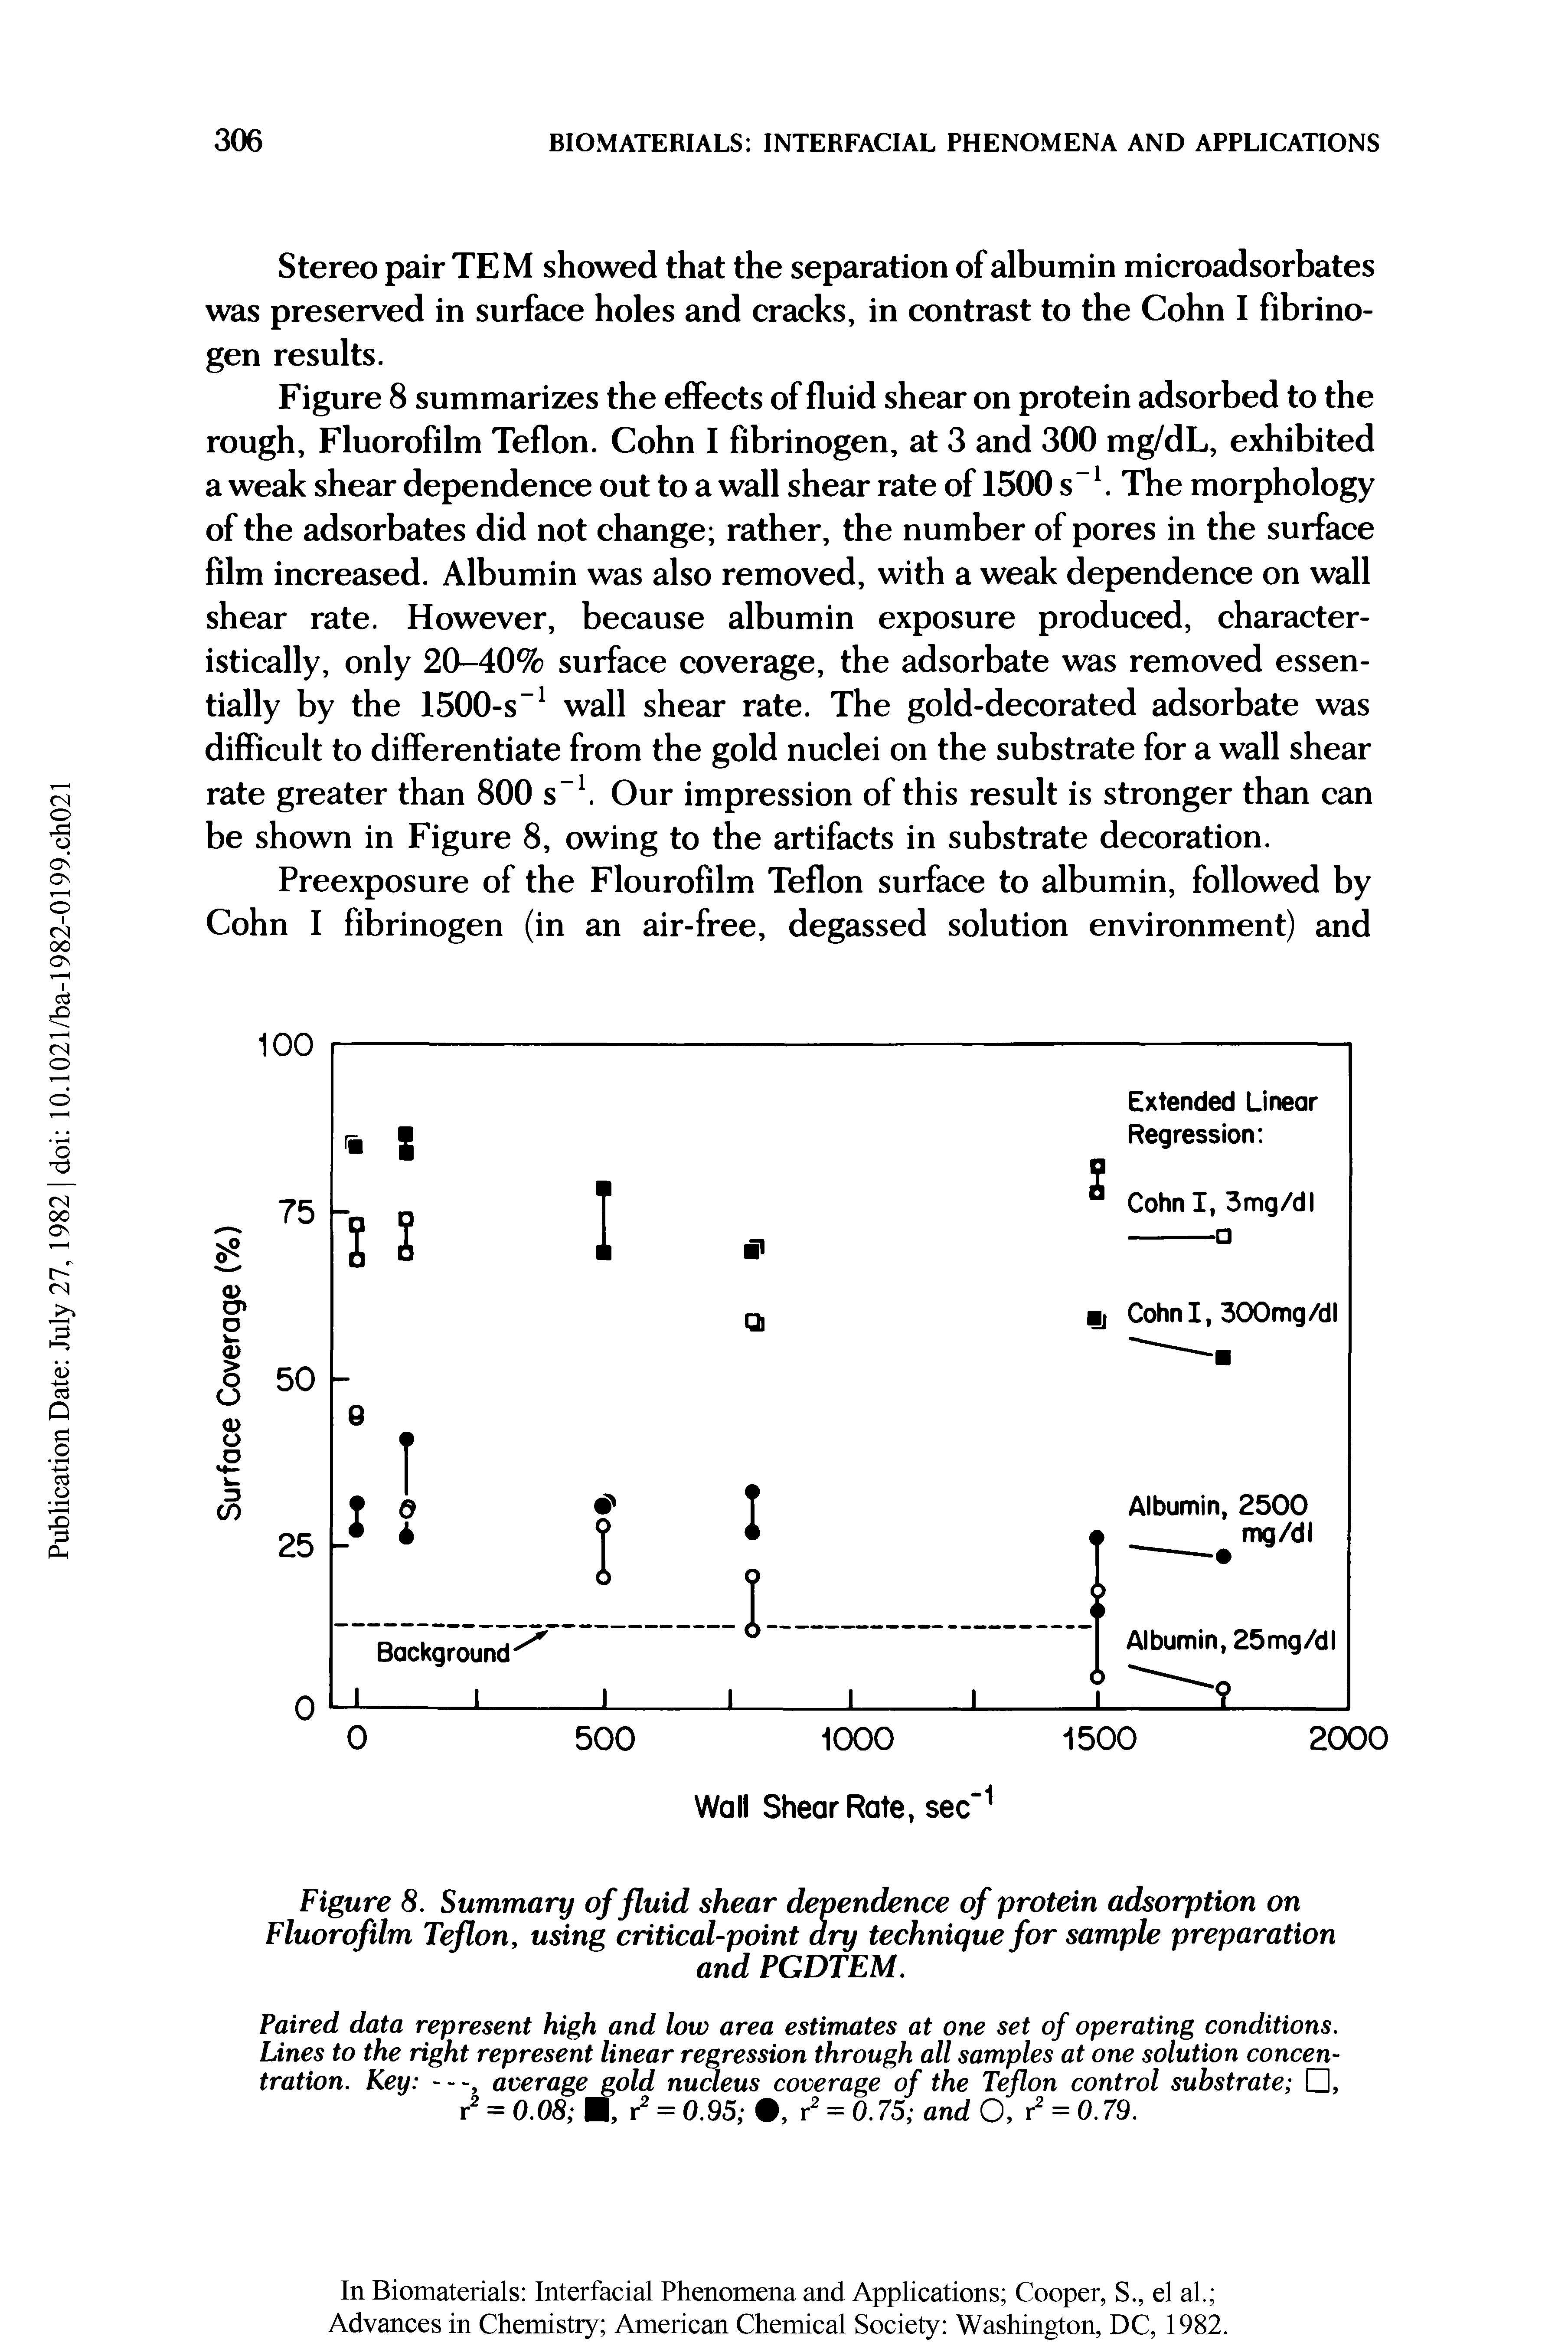 Figure 8. Summary of fluid shear dependence of protein adsorption on Fluorofilm Teflon, using critical-point dry technique for sample preparation...